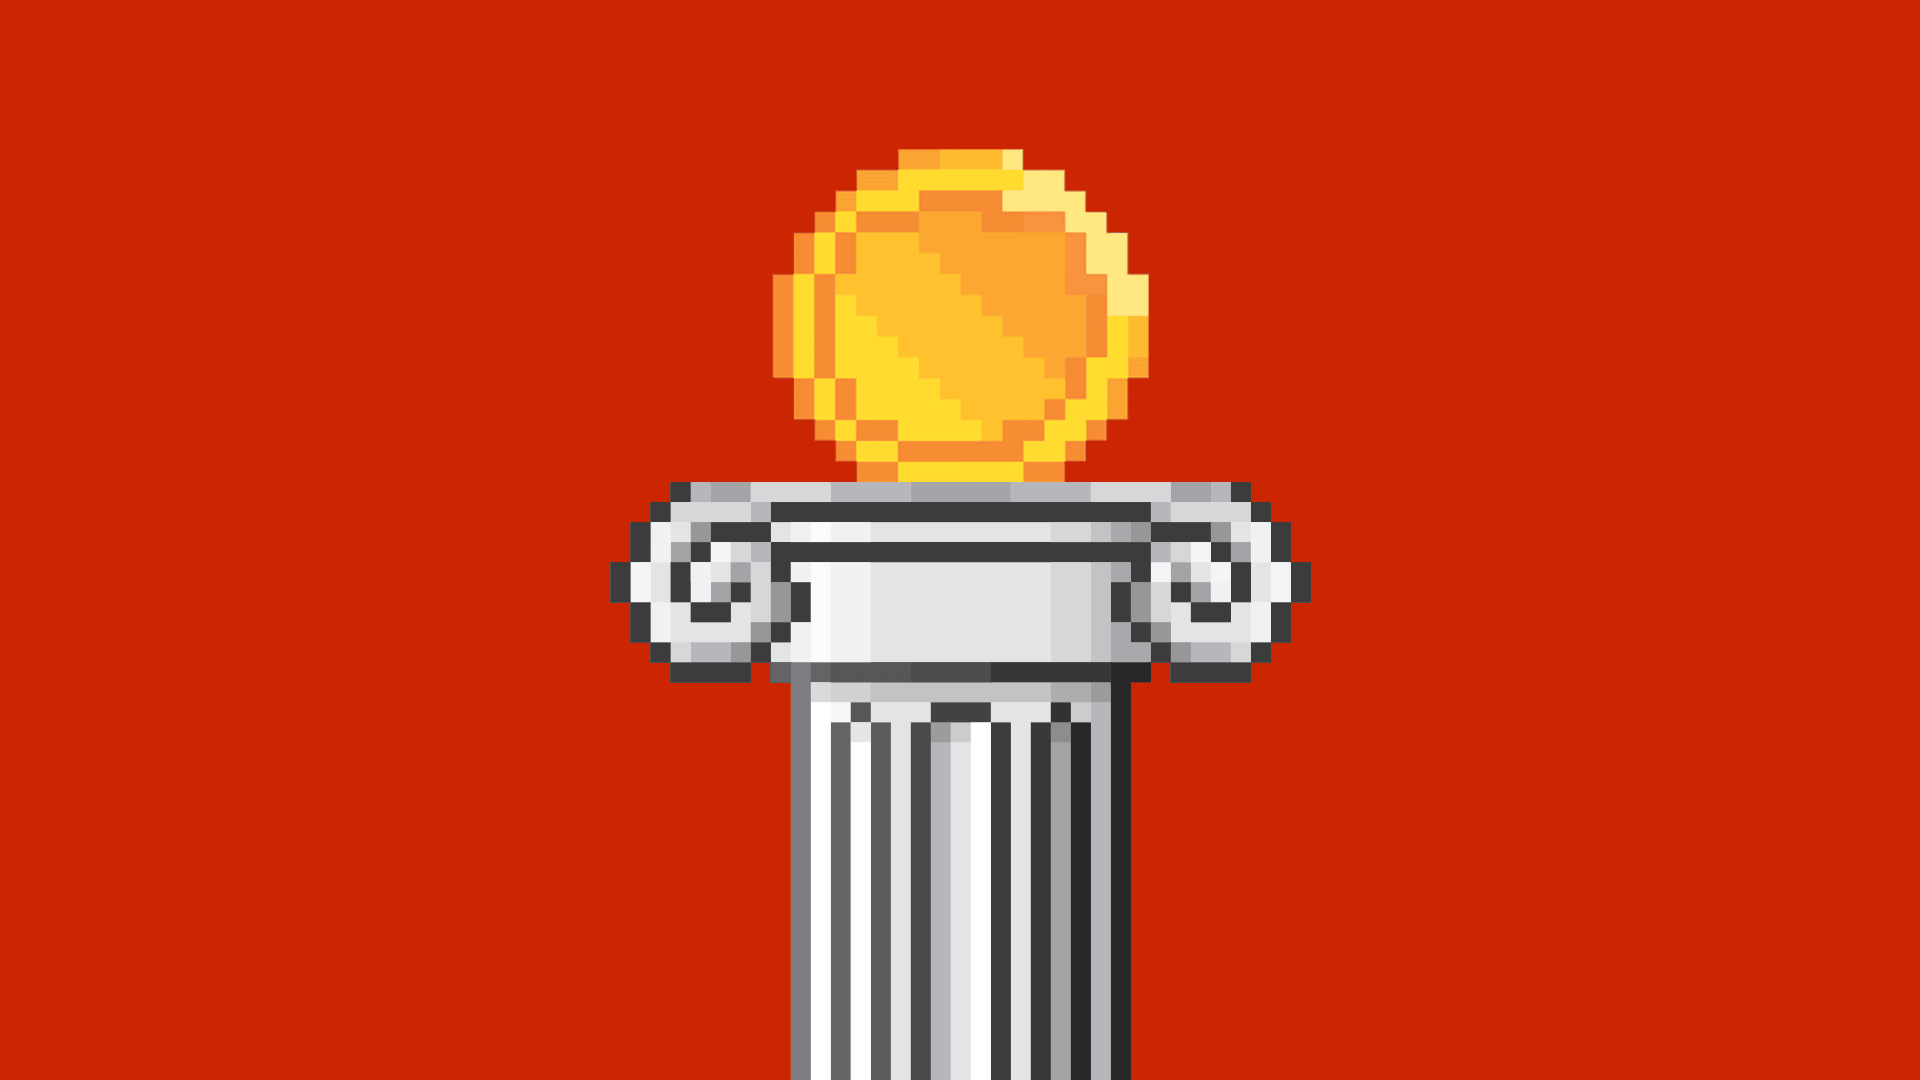 Illustration of a digital coin on top of a wobbly pillar